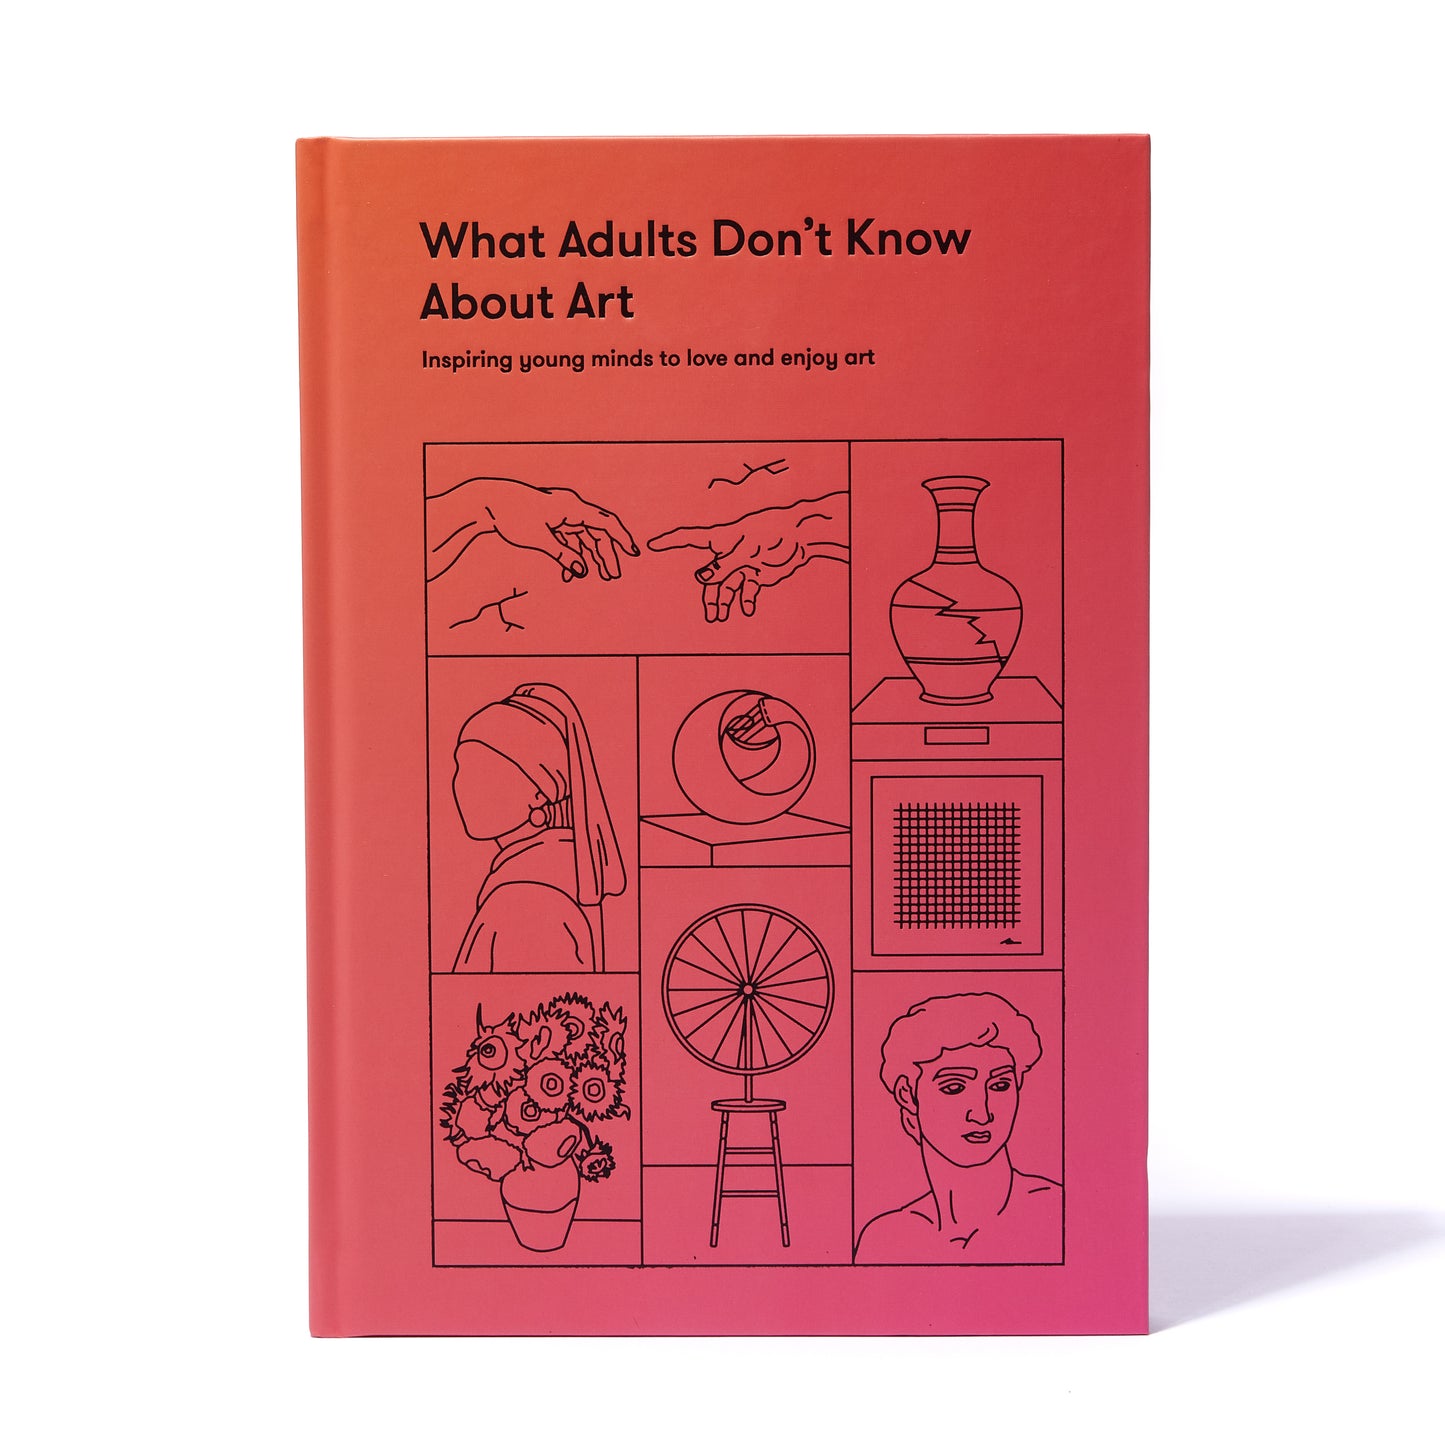 WHAT ADULTS DON'T KNOW ABOUT ART